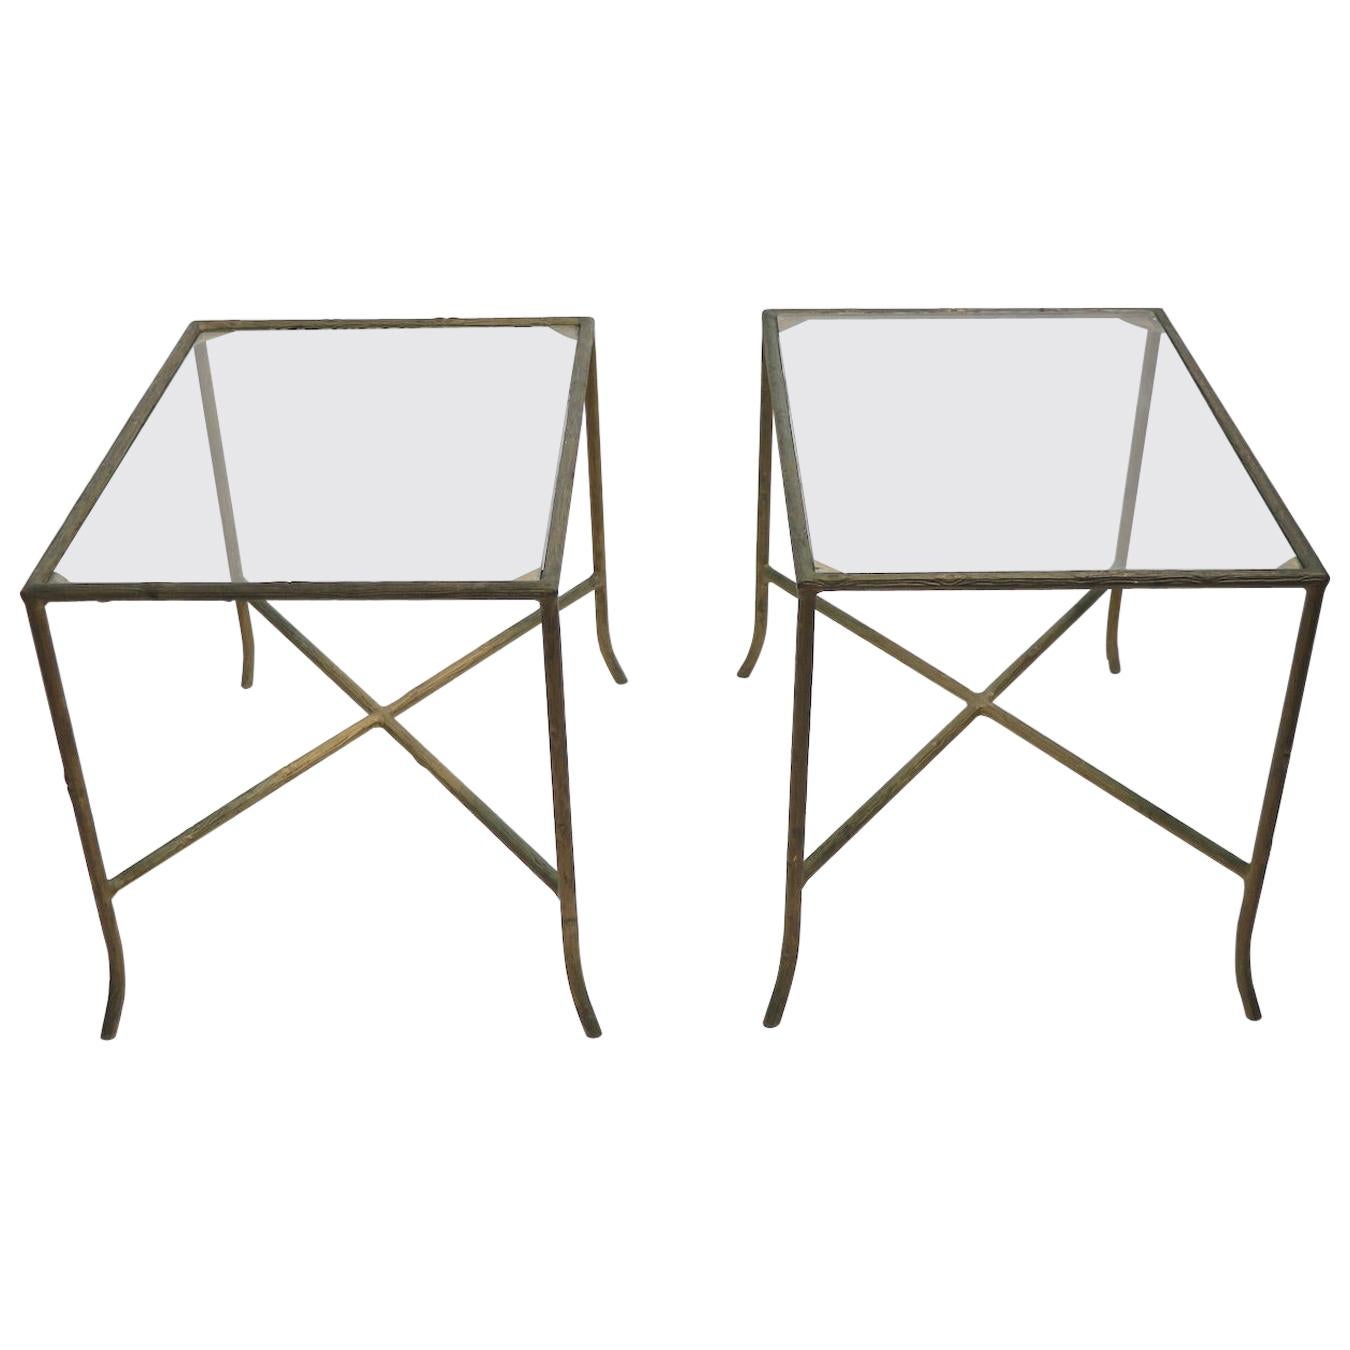 Pair of Faux Wood Cast Metal and Glass Tables For Sale